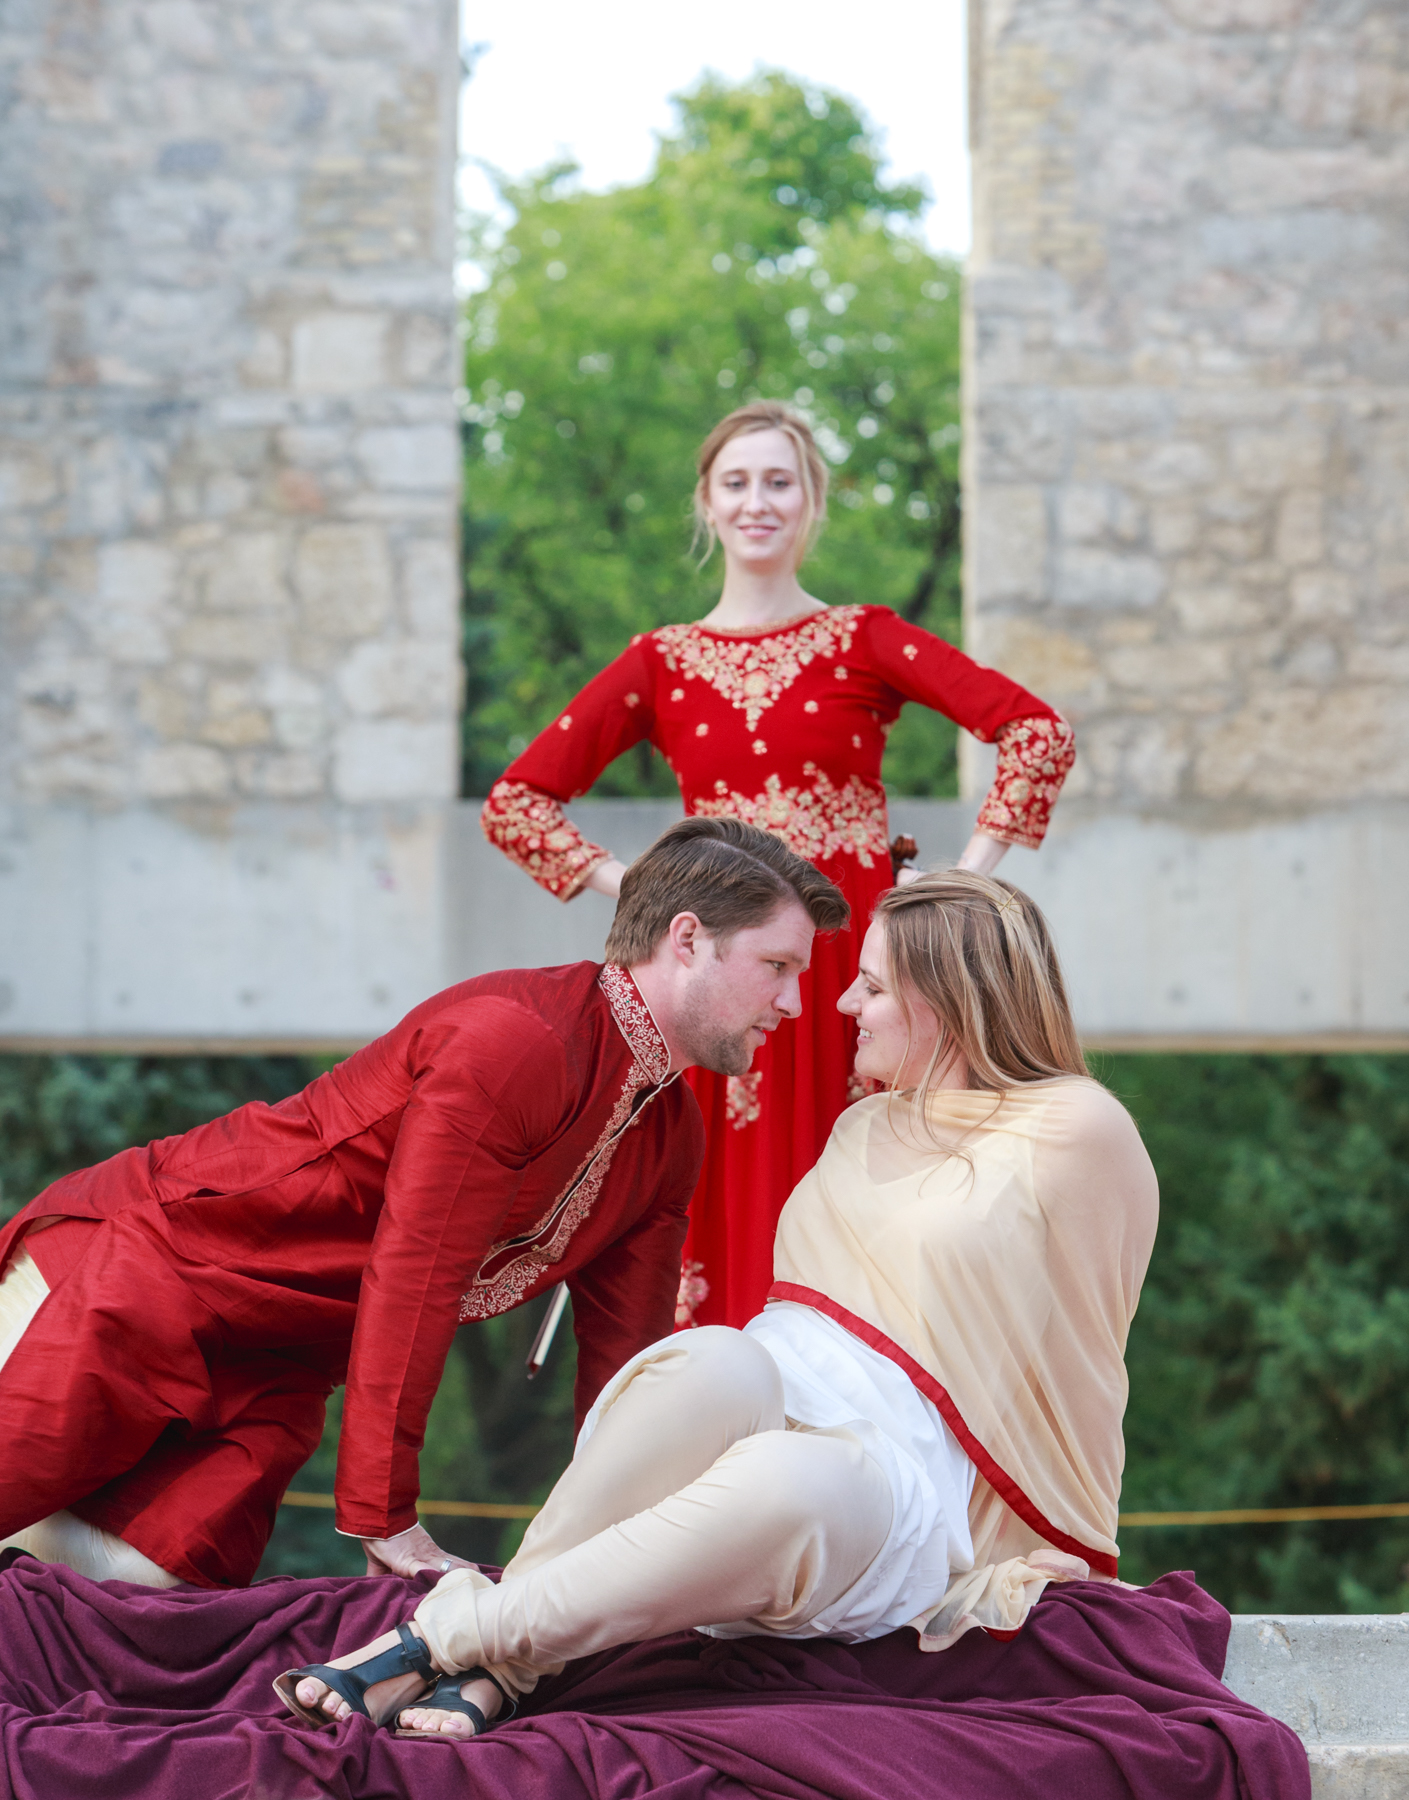 Preview: Opera up close and personal at Manitoba Underground Opera